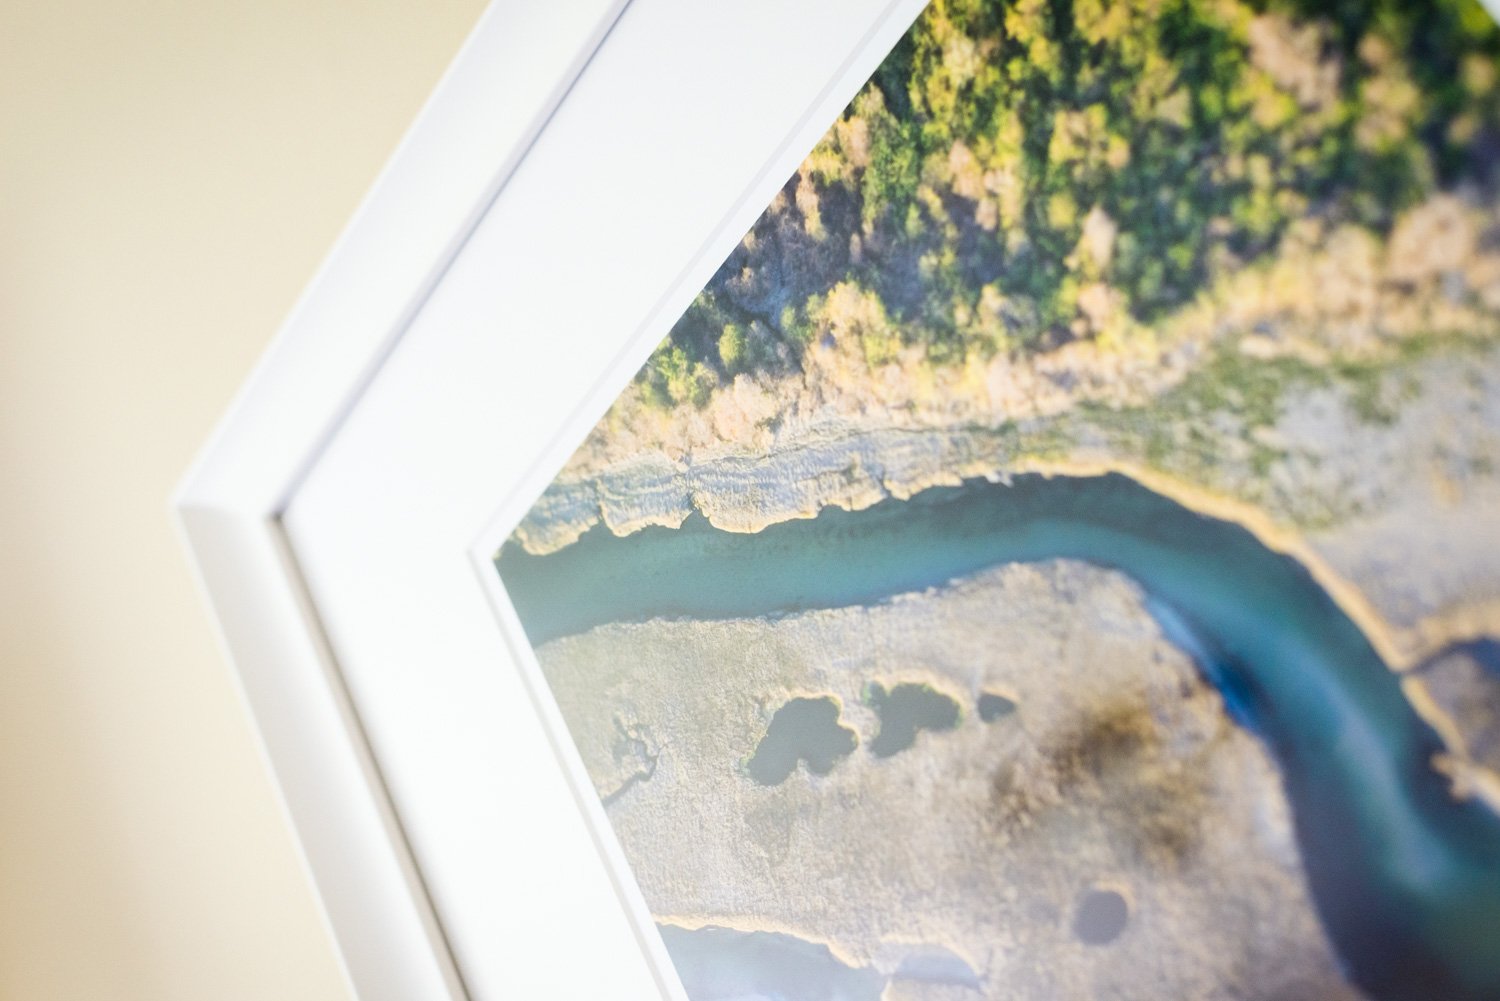 Cate Brown Photo The Narrows Aerial #1 // Framed Fine Art 20x26" // Limited Edition 1 of 150 Available Inventory Ocean Fine Art